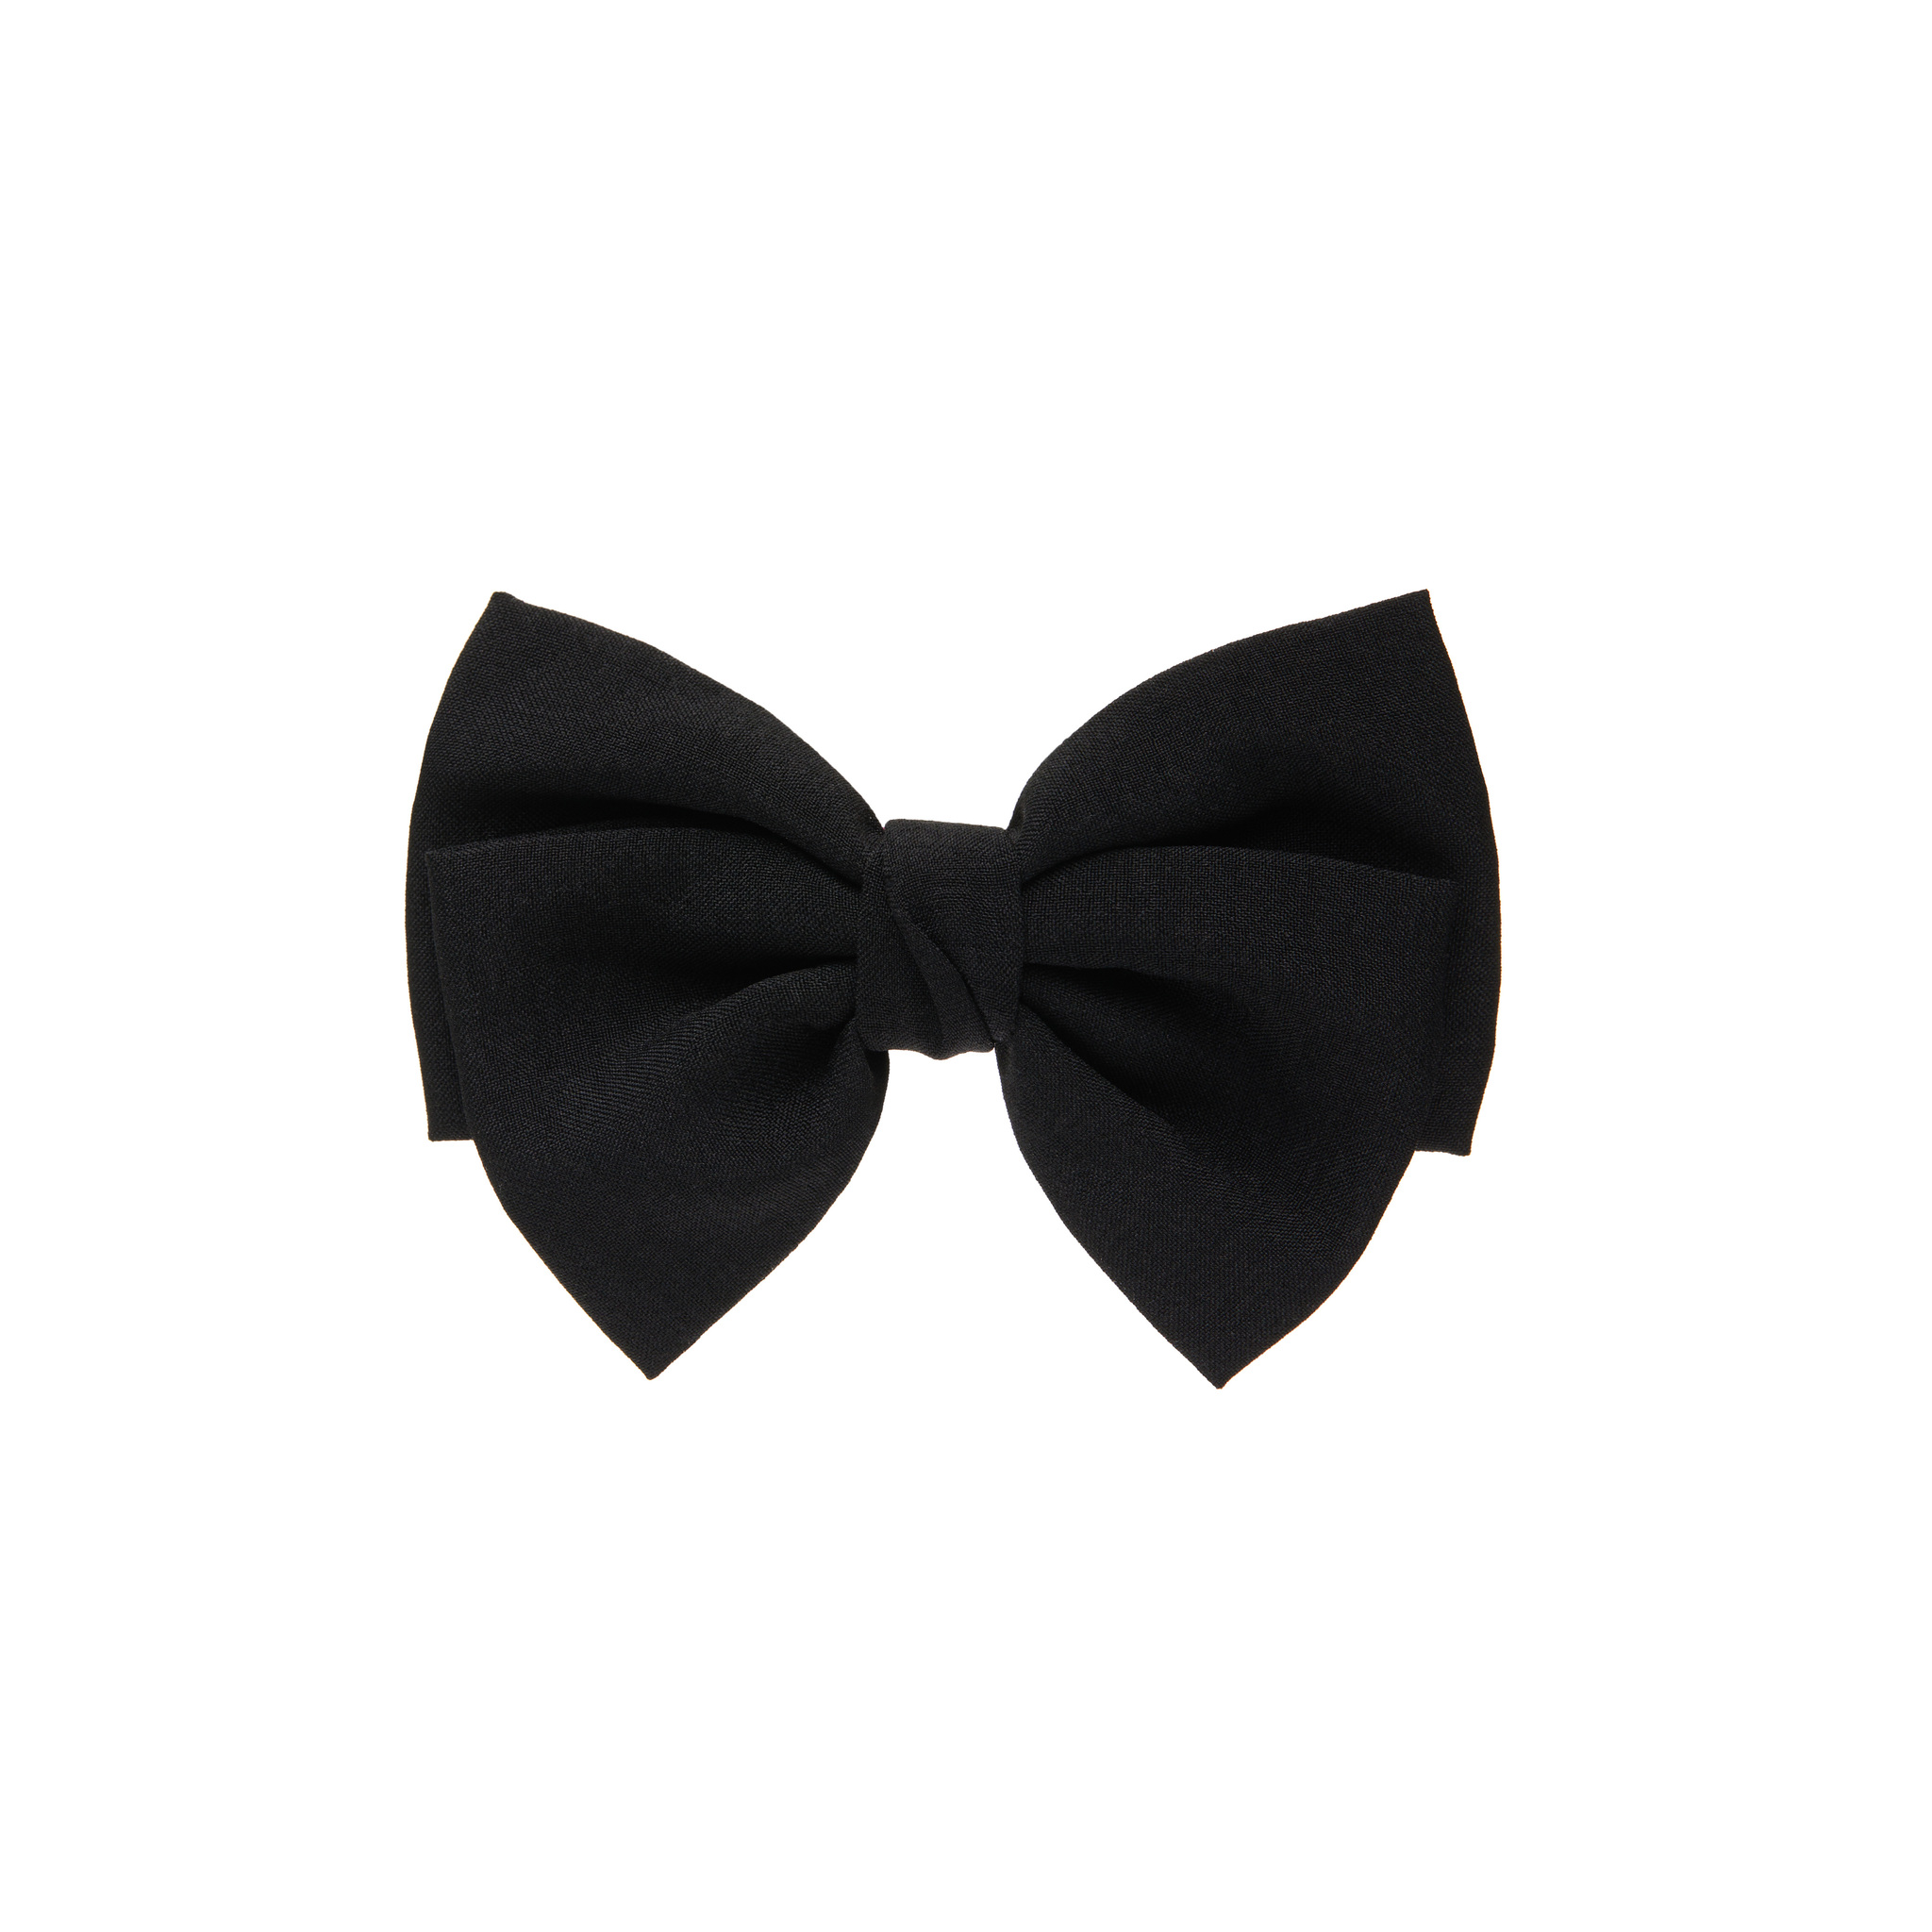 HOLLY JUNE Заколка Bow Hair Clip – Black déjà vu заколка soft pink bow hair clip